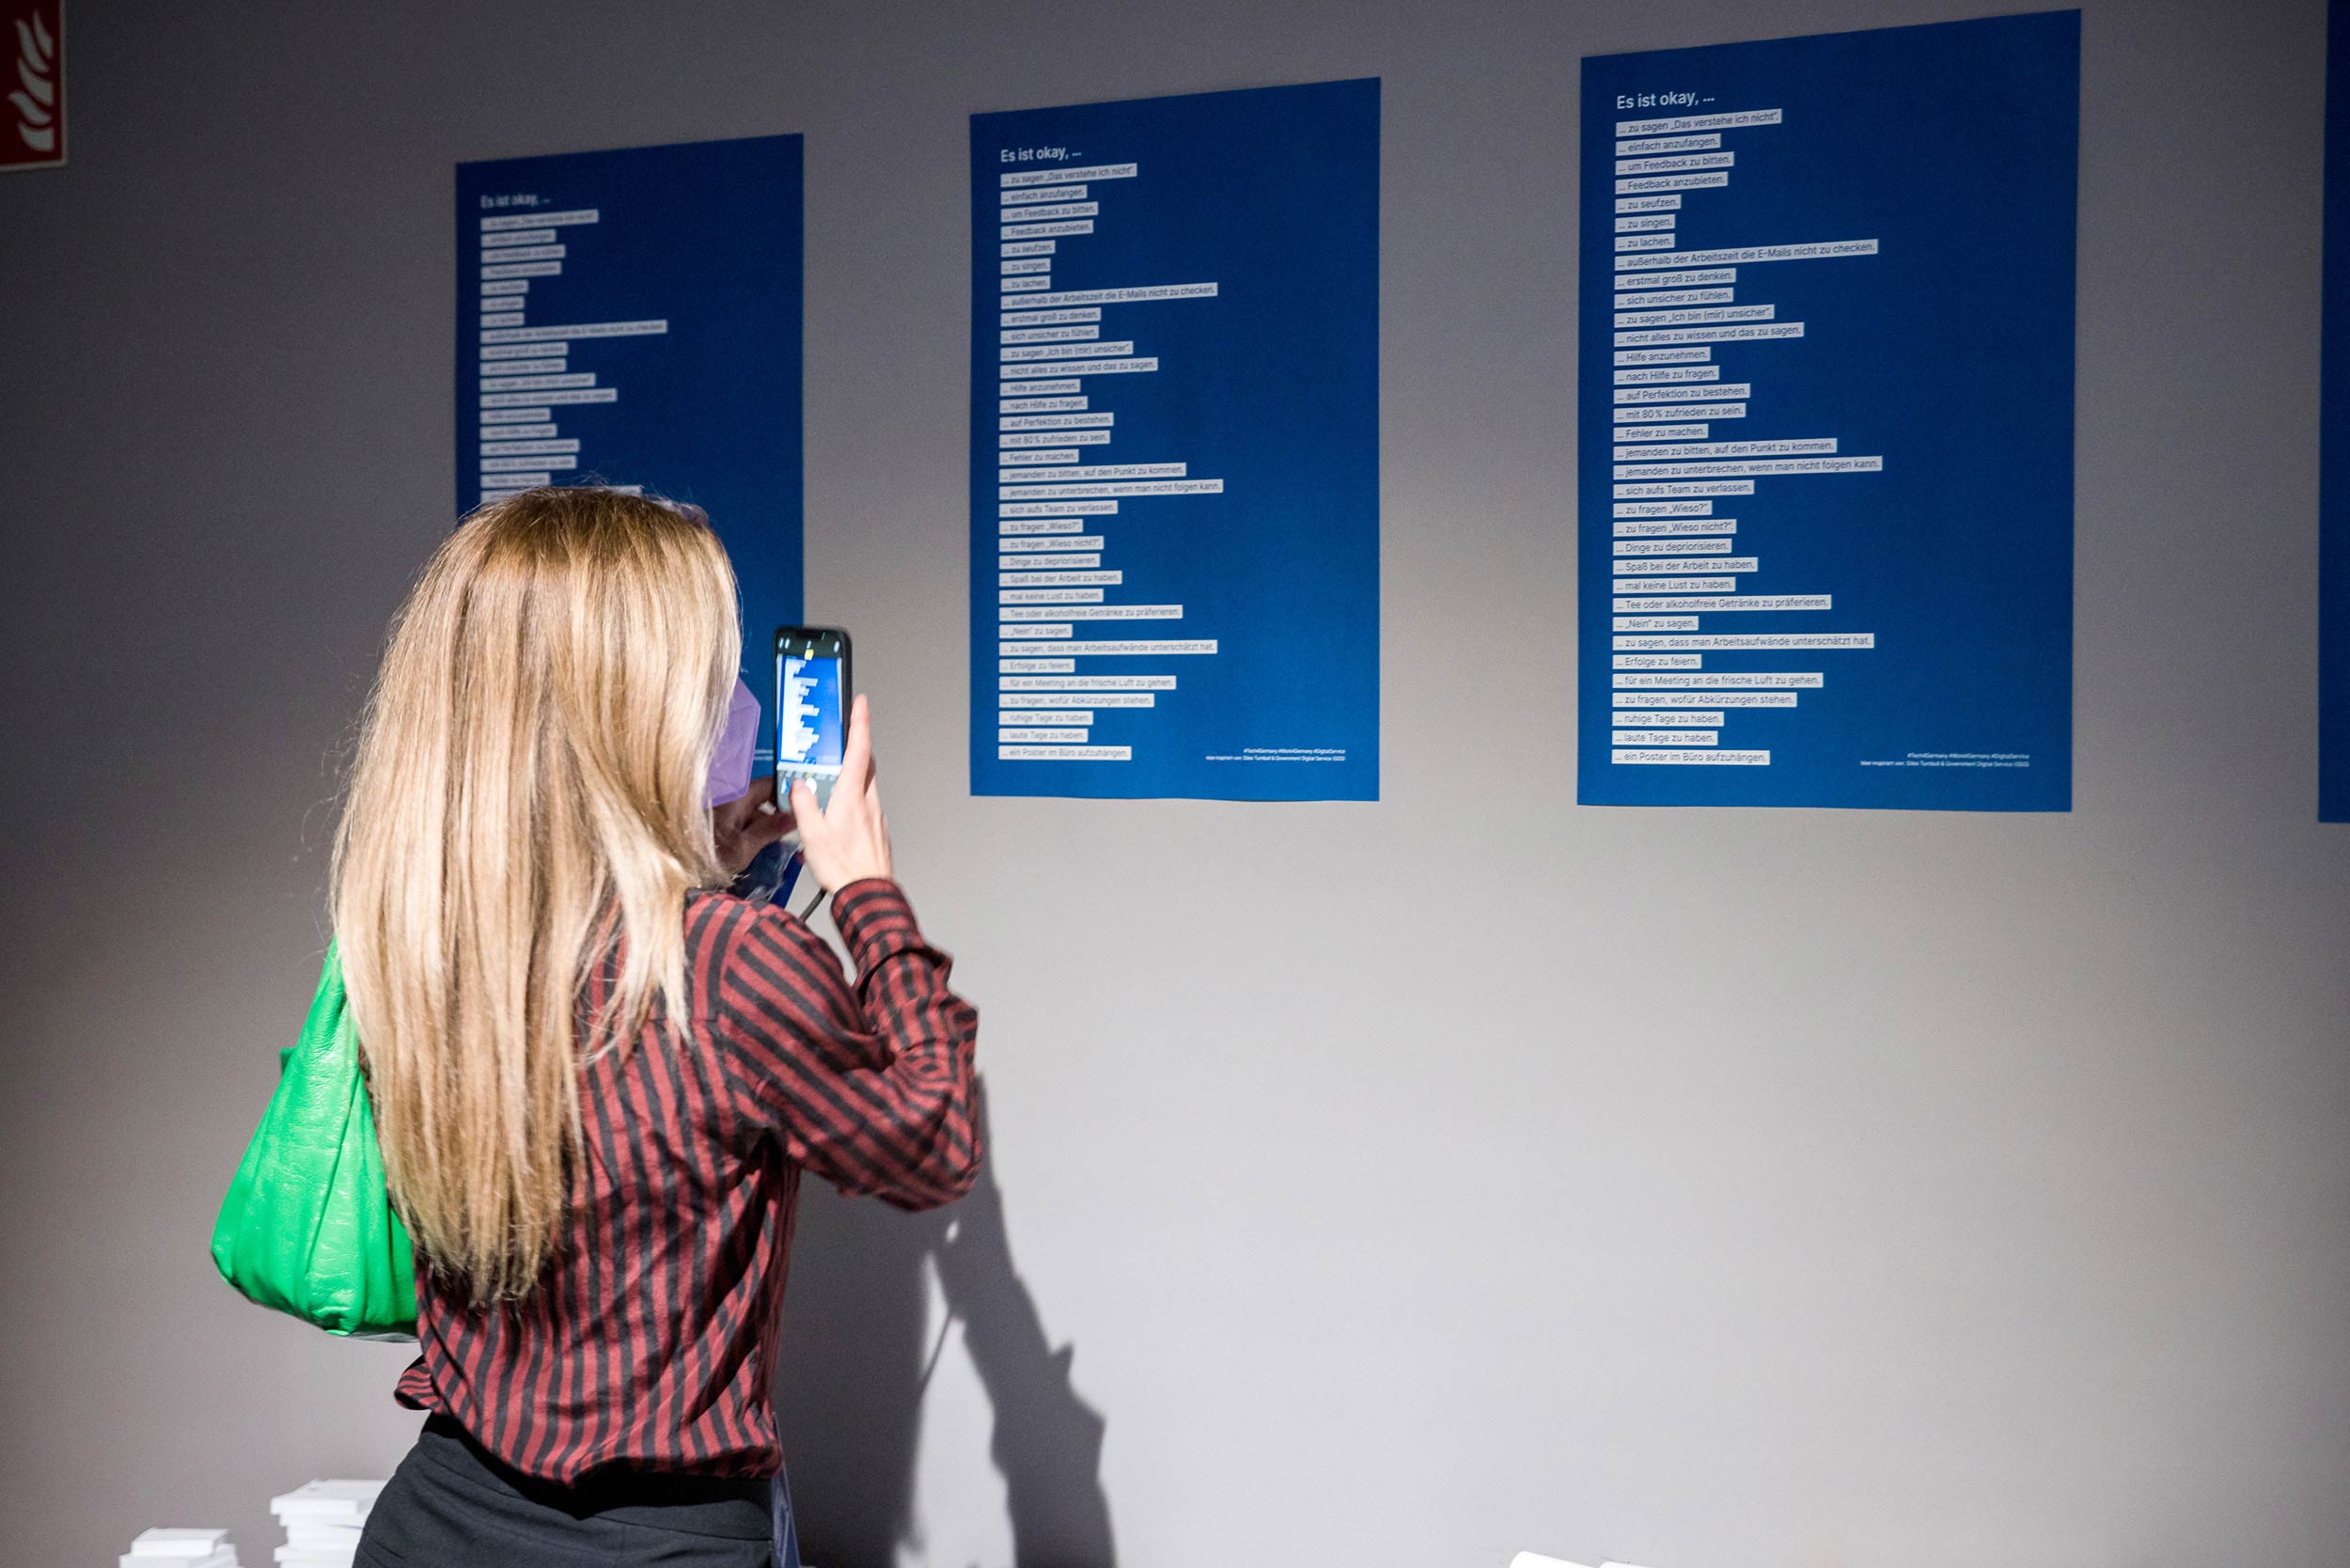 A person with long light hair stands in front of three identical blue posters, which she photographs with her phone - the posters contain two dozen lines of text